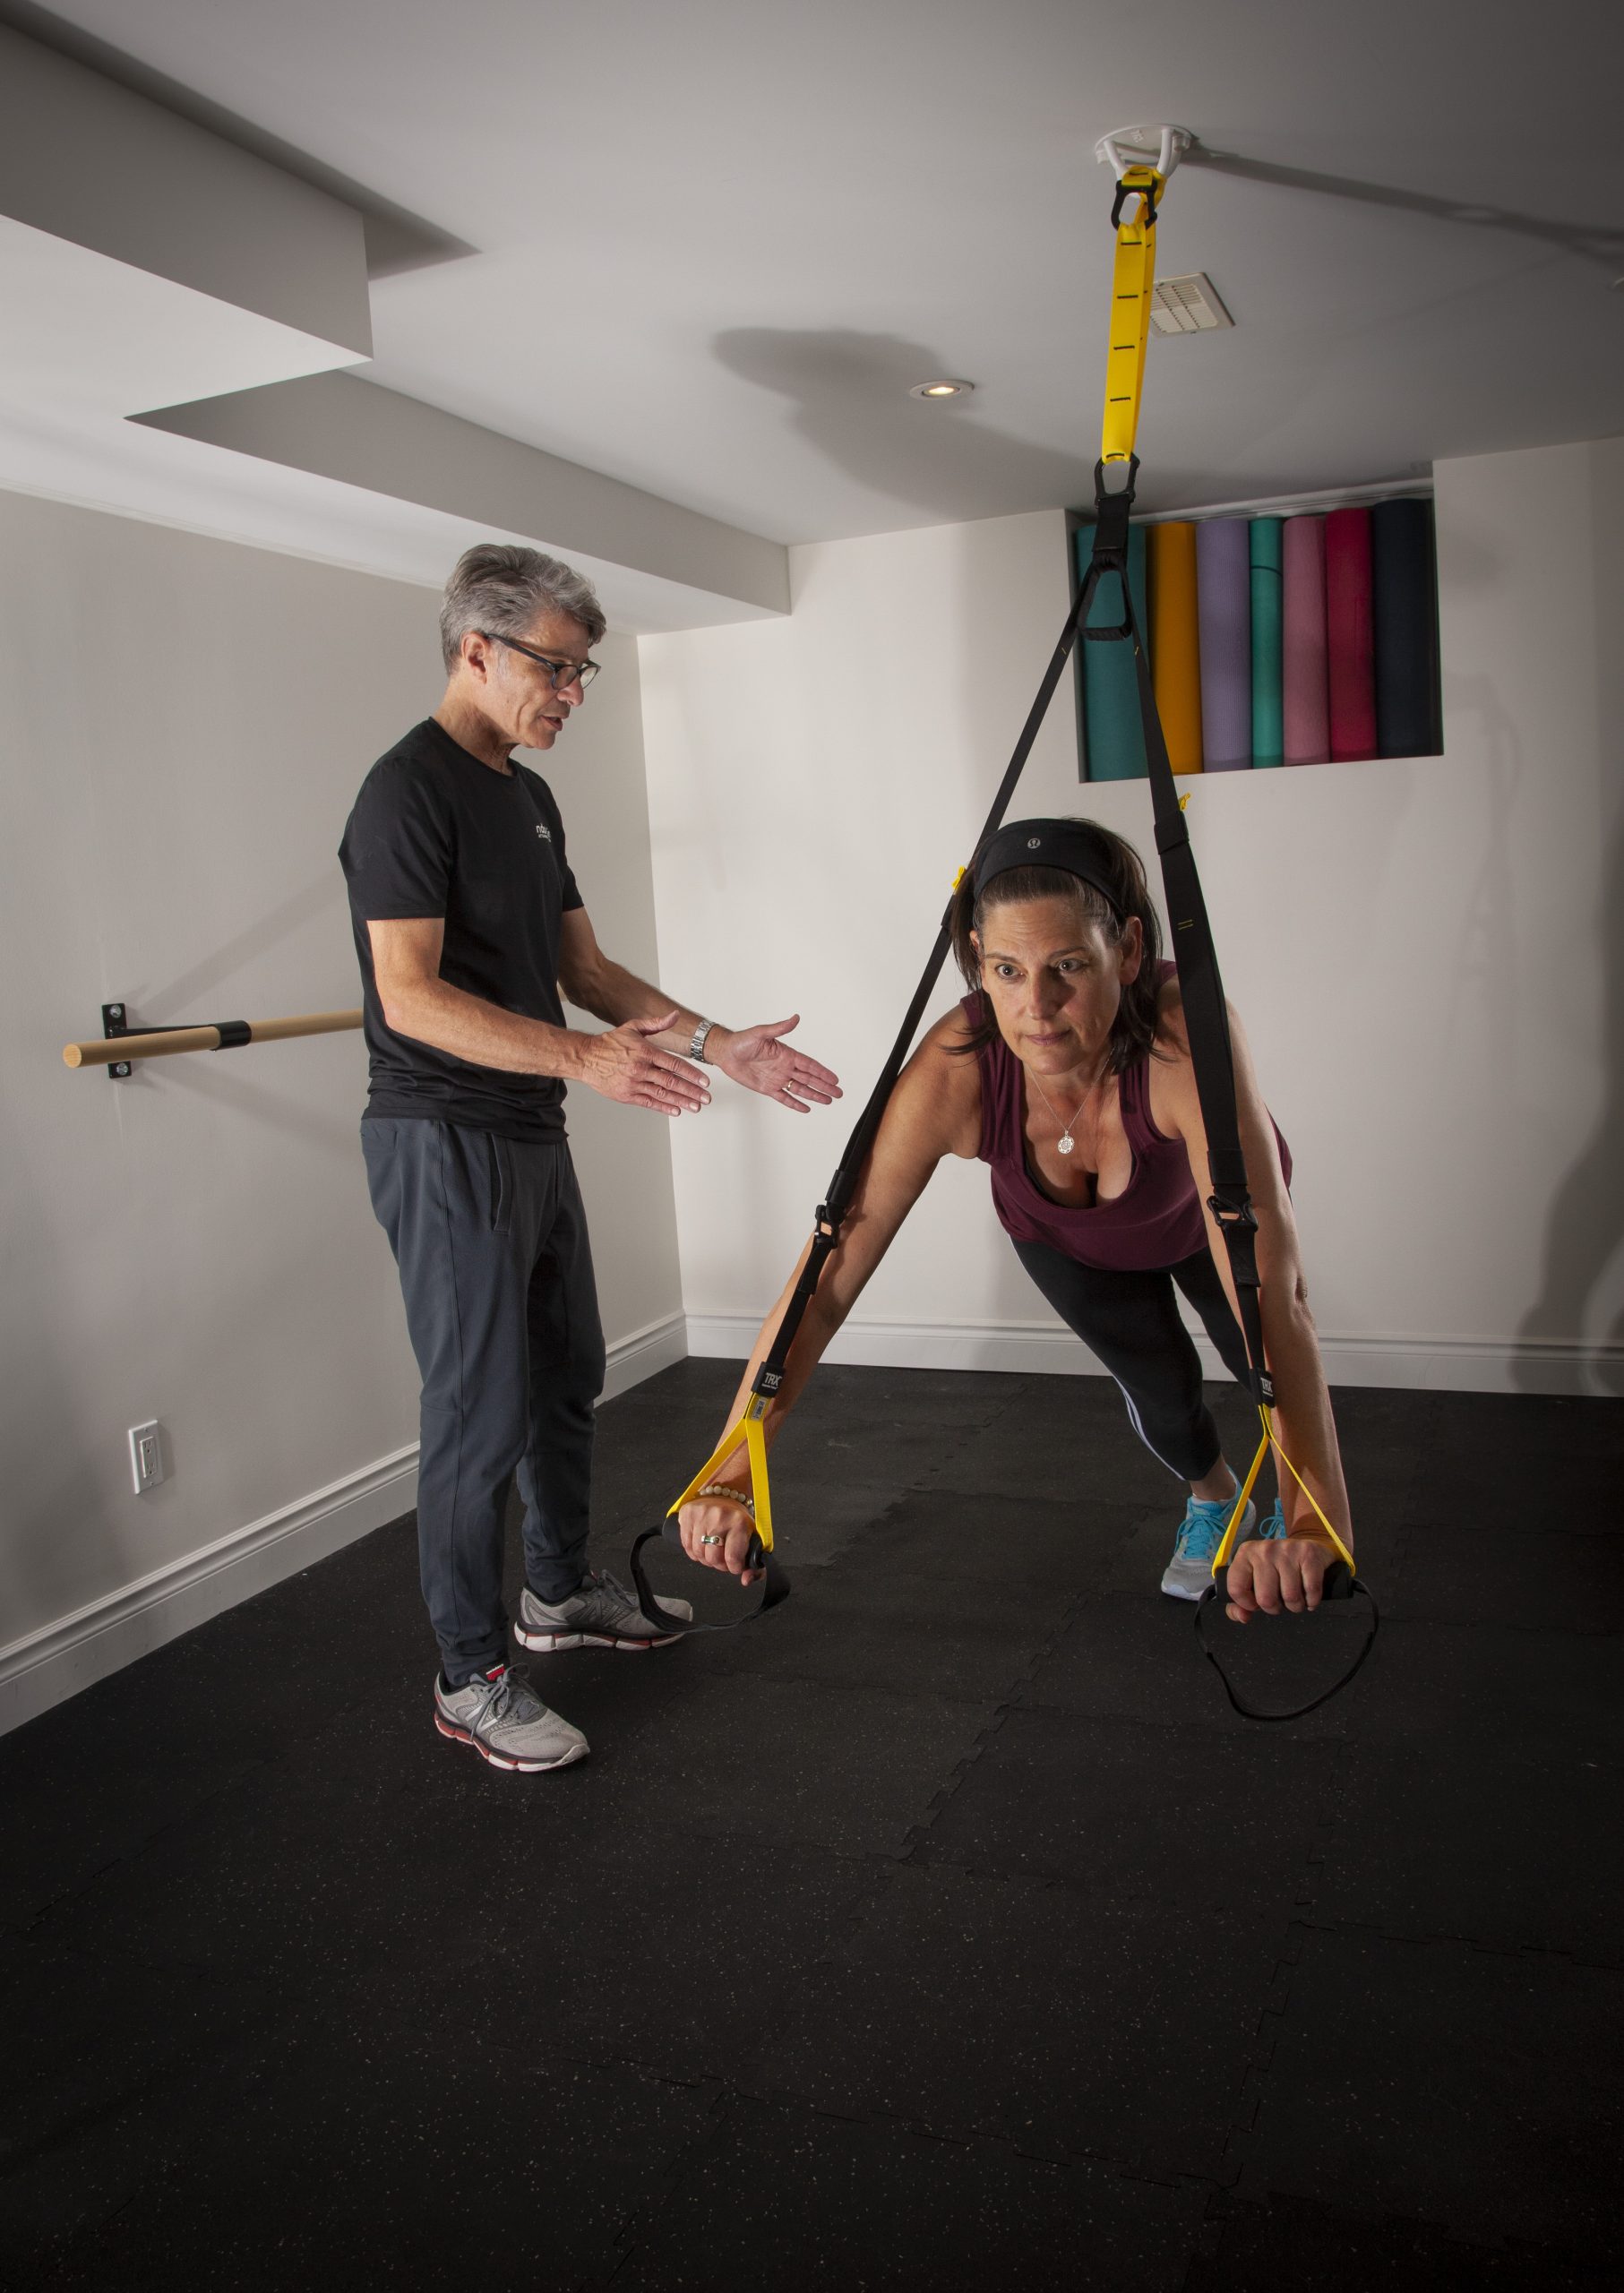 Neil encouraging a client during a TRX training session